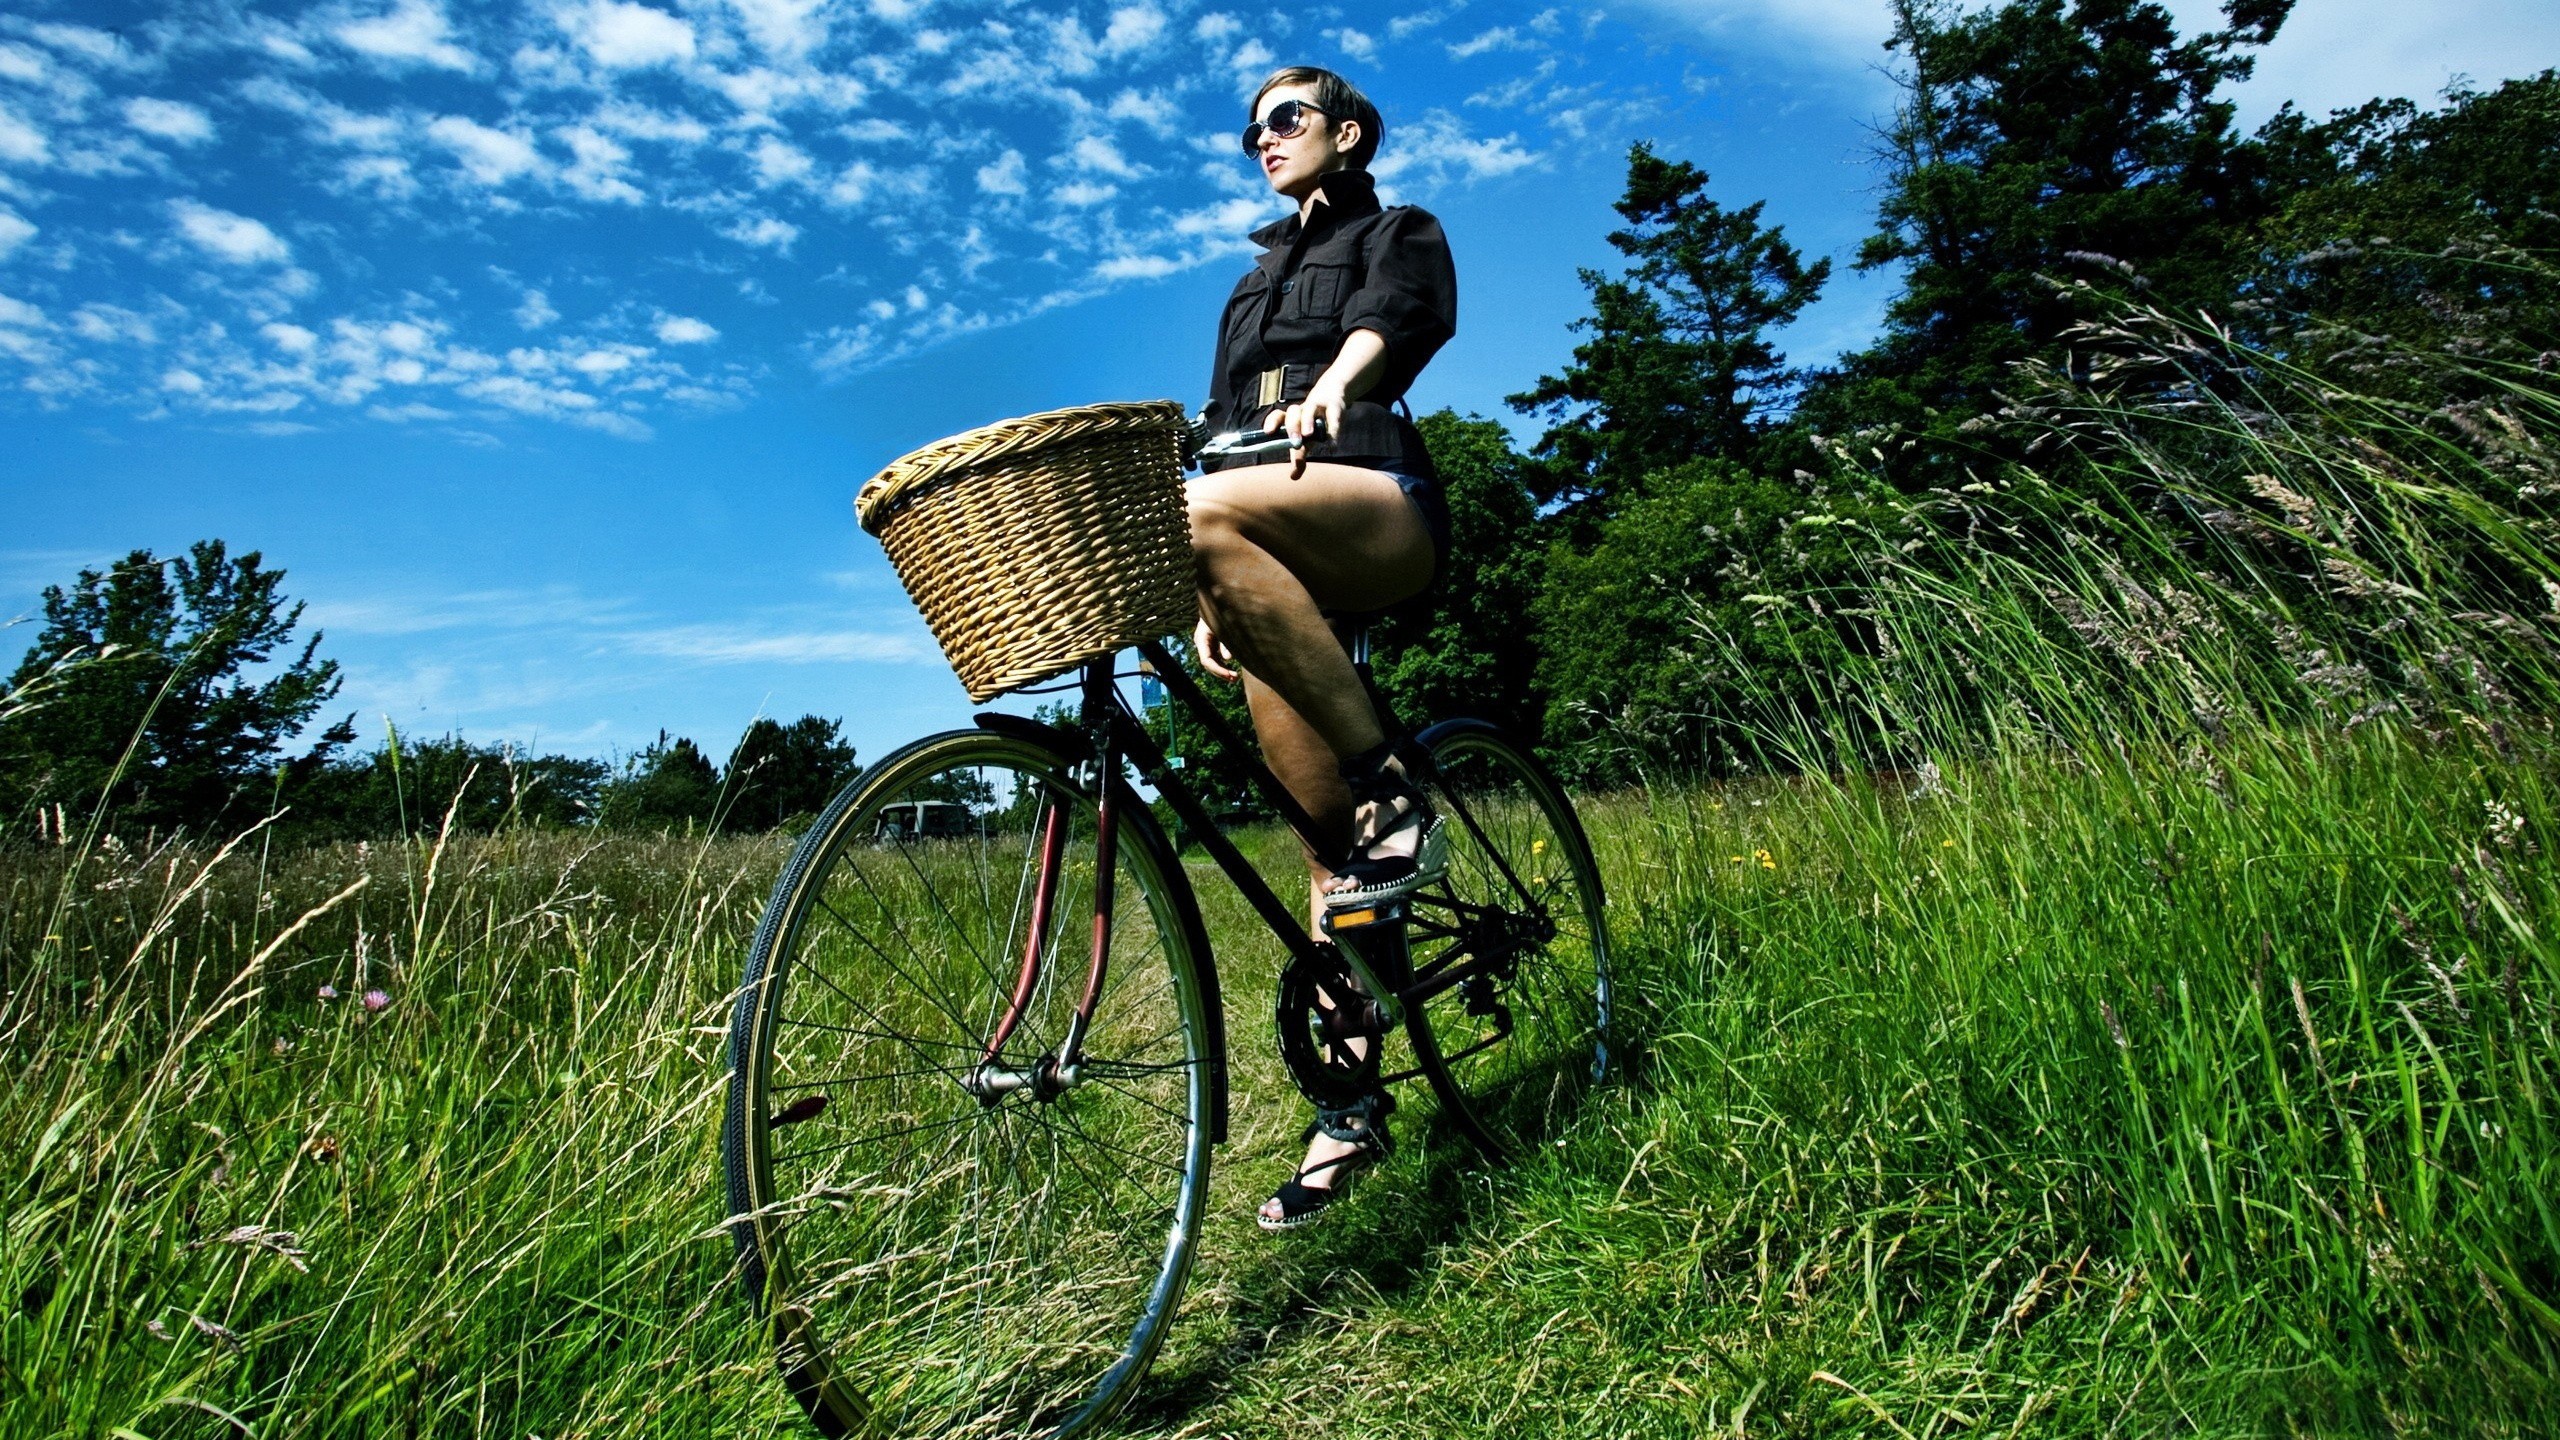 People 2560x1440 model women bicycle nature glasses women with bicycles women outdoors vehicle sunglasses women with shades plants grass baskets